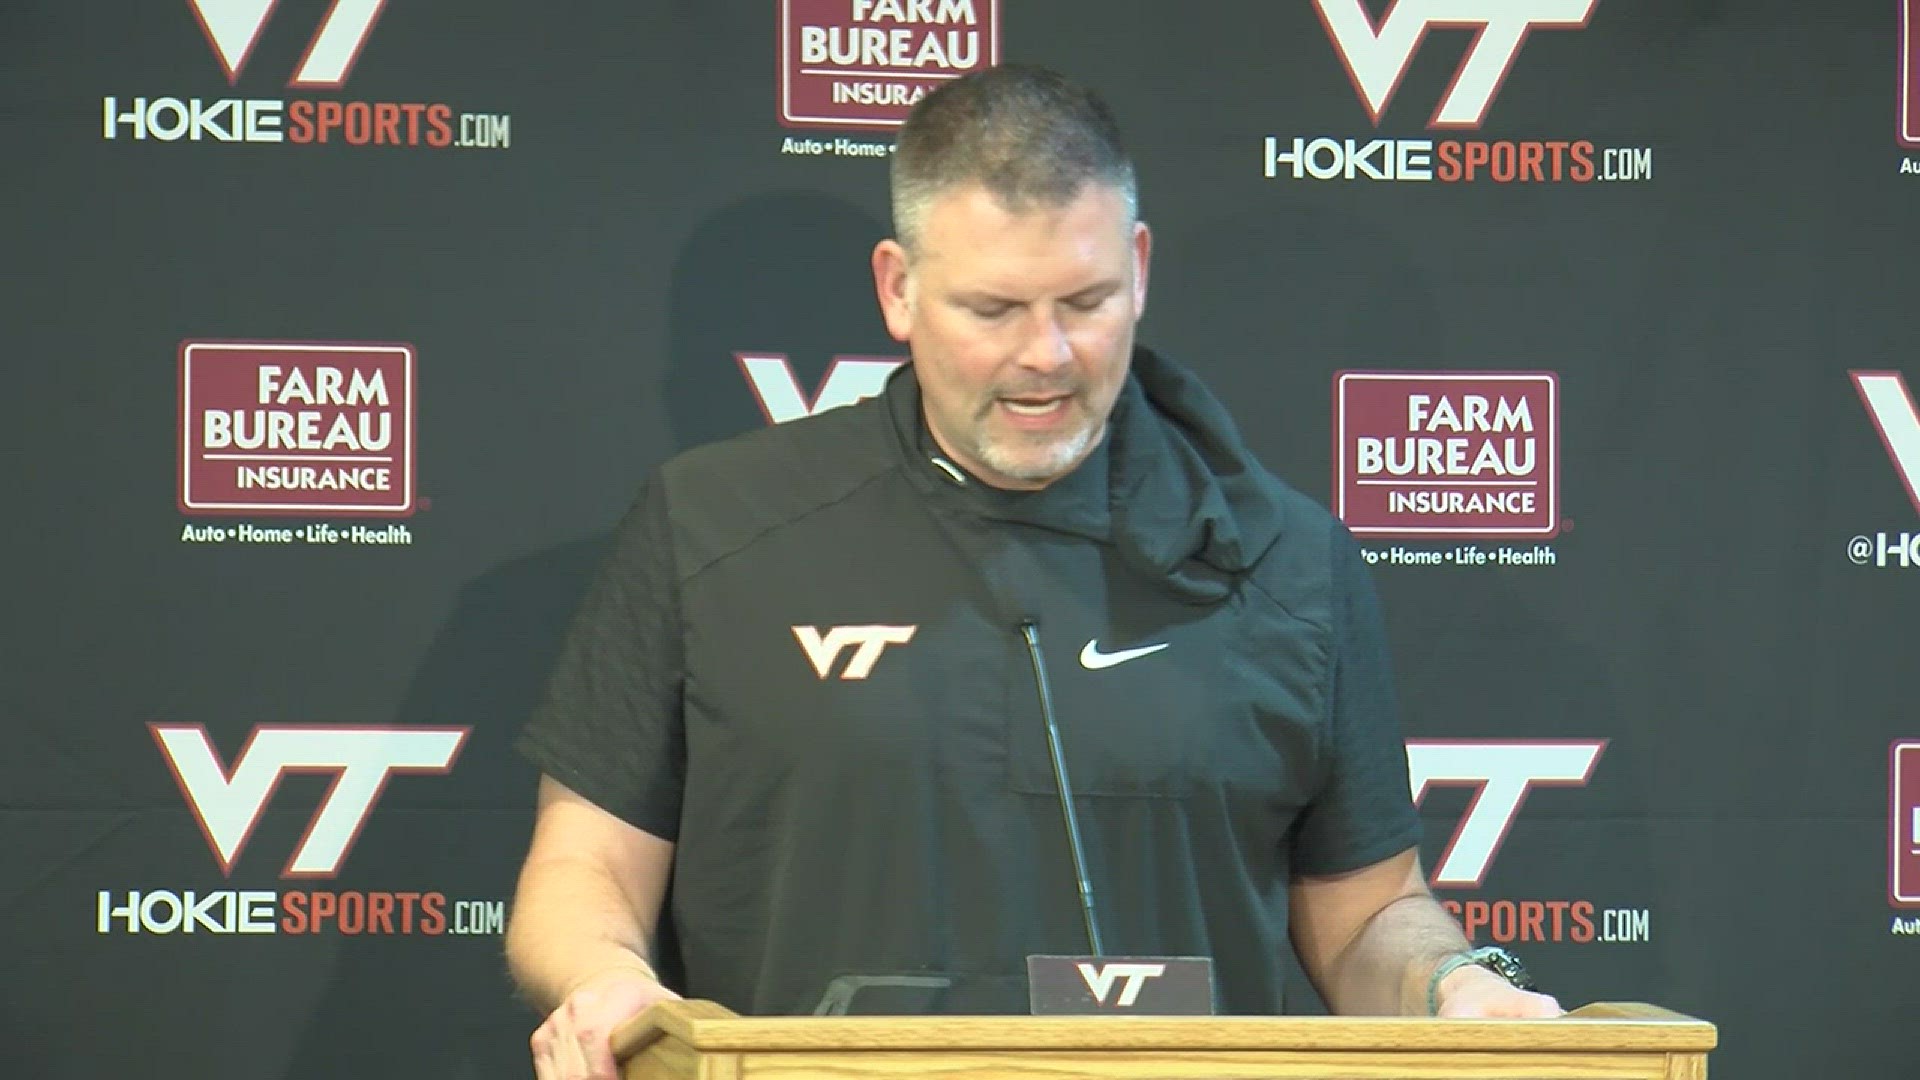 Virginia Tech's head coach weighs in on the importance of spring football.